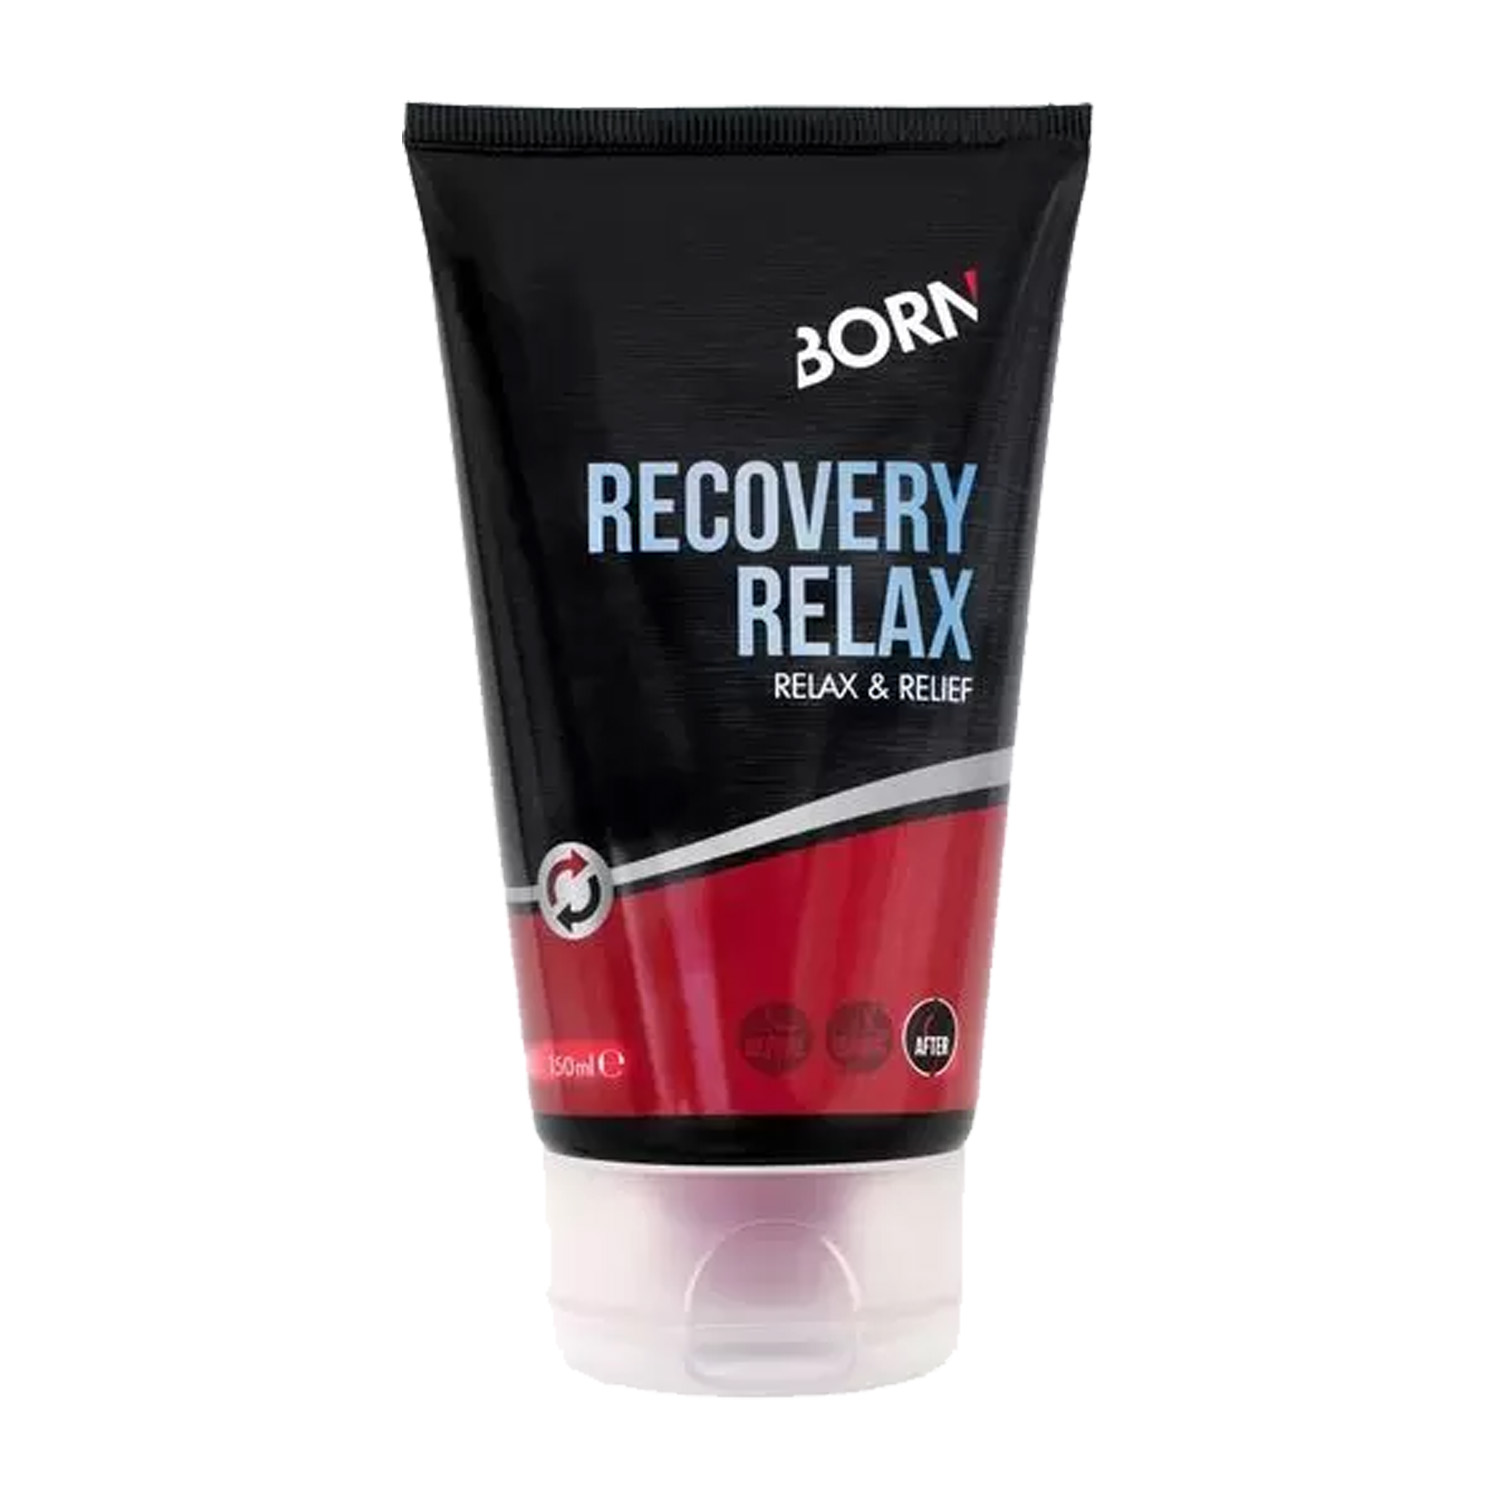 Born Recovery relax